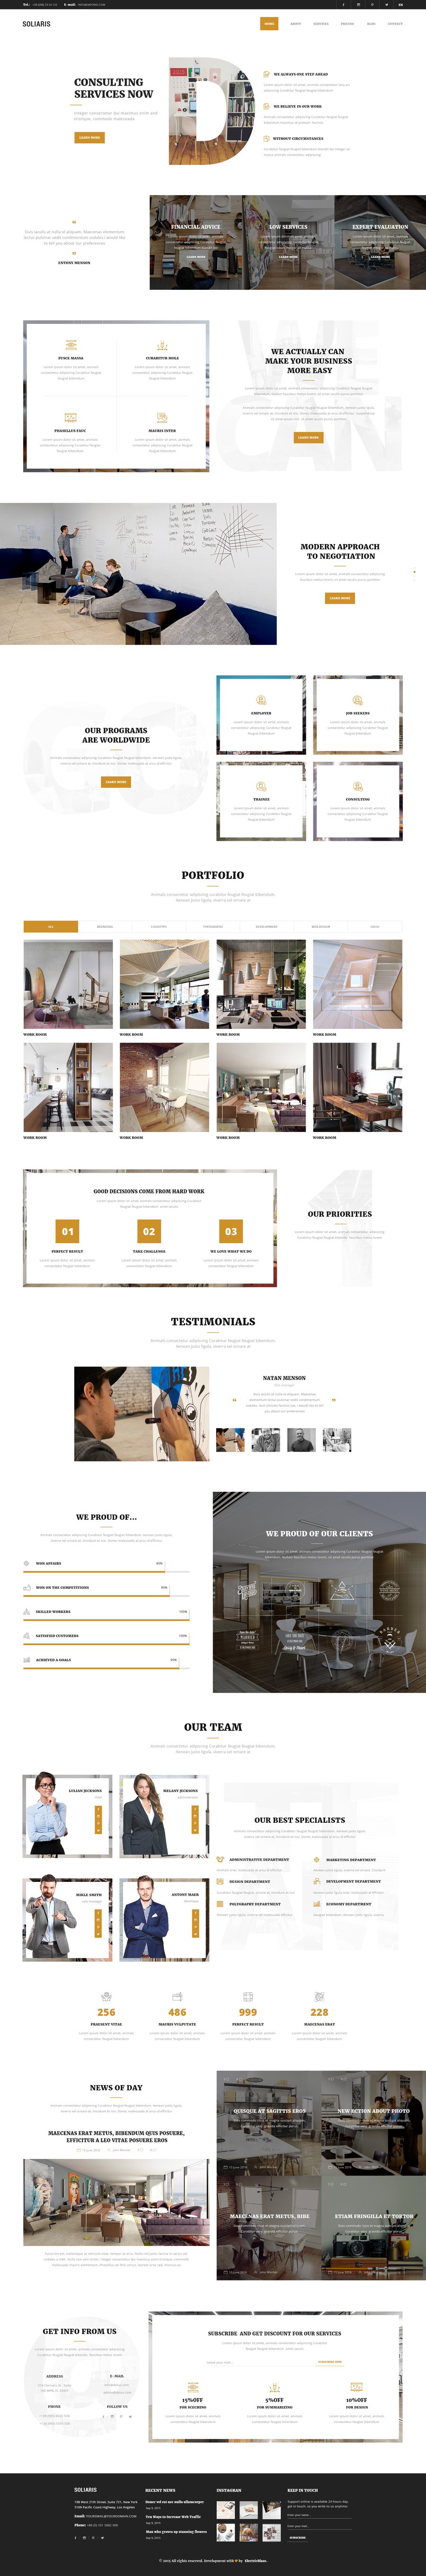 Soliaris - 18 One Page Bootstrap Templates - 4